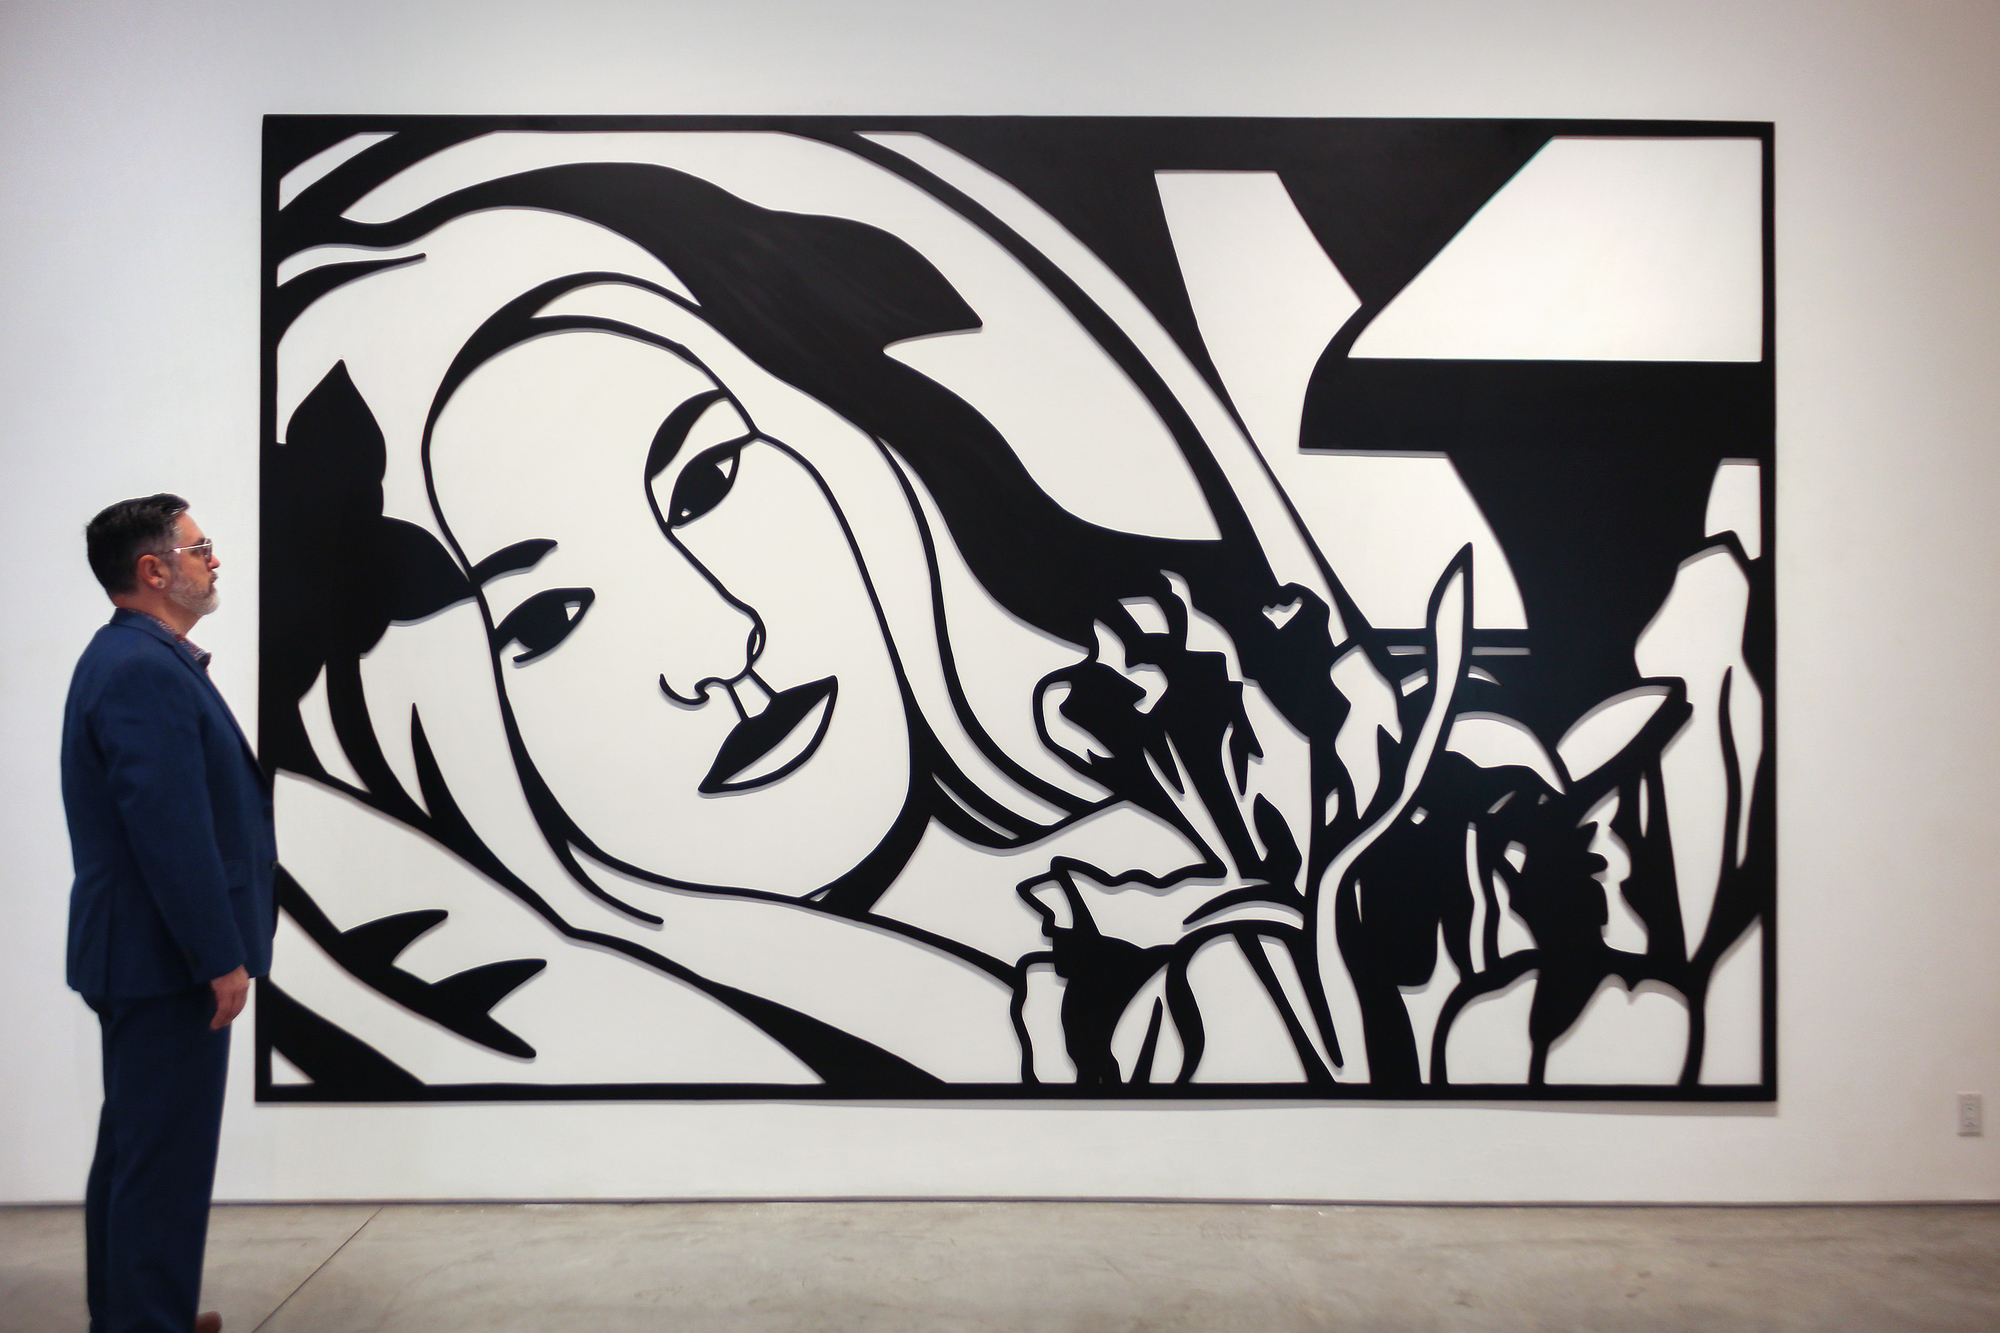 Tom Wesselmann will undoubtedly be remembered for associating his erotic themes with the colors of the American flag. But Wesselmann had considerable gifts as a draftsman, and the line was his principal preoccupation, first as a cartoonist and later as an ardent admirer of Matisse. That he also pioneered a method of turning drawings into laser-cut steel wall reliefs proved a revelation. He began to focus ever more on drawing for the sake of drawing, enchanted that the new medium could be lifted and held: “It really is like being able to pick up a delicate line drawing from the paper.”<br><br>The Steel Drawings caused both excitement and confusion in the art world. After acquiring one of the ground-breaking works in 1985, the Whitney Museum of American Art wrote Wesselmann wondering if it should be cataloged as a drawing or a sculpture. The work had caused such a stir that when Eric Fischl visited Wesselmann at his studio and saw steel-cut works for the first time, he remembered feeling jealous. He wanted to try it but dared not. It was clear: ‘Tom owned the technique completely.’<br><br>Wesselmann owed much of that technique to his year-long collaboration with metalwork fabricator Alfred Lippincott. Together, in 1984 they honed a method for cutting the steel with a laser that provided the precision he needed to show the spontaneity of his sketches. Wesselmann called it ‘the best year of my life’, elated at the results that he never fully achieved with aluminum that required each shape be hand-cut.  “I anticipated how exciting it would be for me to get a drawing back in steel. I could hold it in my hands. I could pick it up by the lines…it was so exciting…a kind of near ecstasy, anyway, but there’s really been something about the new work that grabbed me.”<br><br>Bedroom Brunette with Irises is a Steel Drawing masterwork that despite its uber-generous scale, utilizes tight cropping to provide an unimposing intimacy while maintaining a free and spontaneous quality. The figure’s outstretched arms and limbs and body intertwine with the petals and the interior elements providing a flowing investigative foray of black lines and white ‘drop out’ shapes provided by the wall. It recalls Matisse and any number of his reclining odalisque paintings. Wesselmann often tested monochromatic values to discover the extent to which color would transform his hybrid objects into newly developed Steel Drawing works and, in this case, continued with a color steel-cut version of the composition Bedroom Blonde with Irises (1987) and later still, in 1993 with a large-scale drawing in charcoal and pastel on paper.